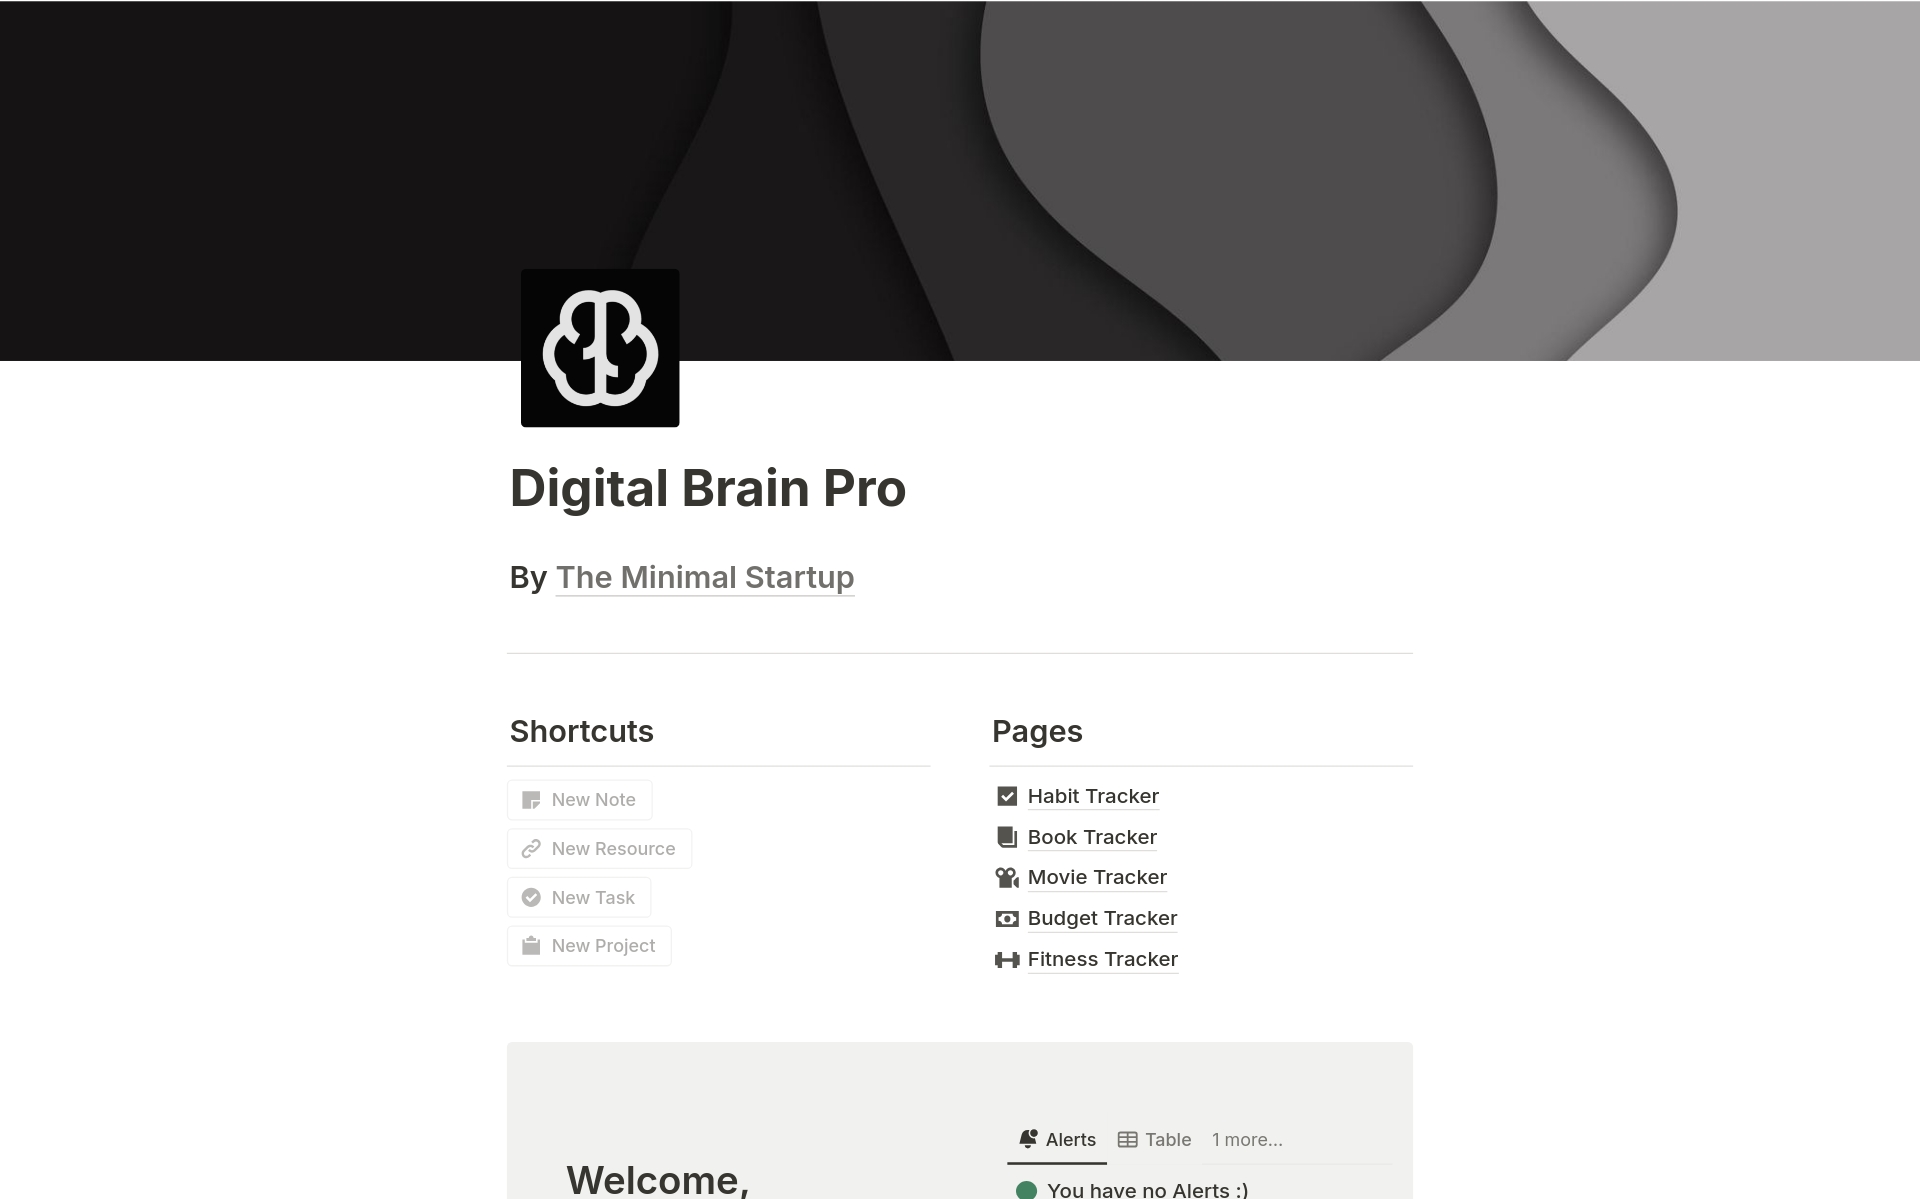 With Digital Brain, you unlock a powerful Notion system that centralizes your tasks, projects, notes, resources, and everything in between, all in one place.